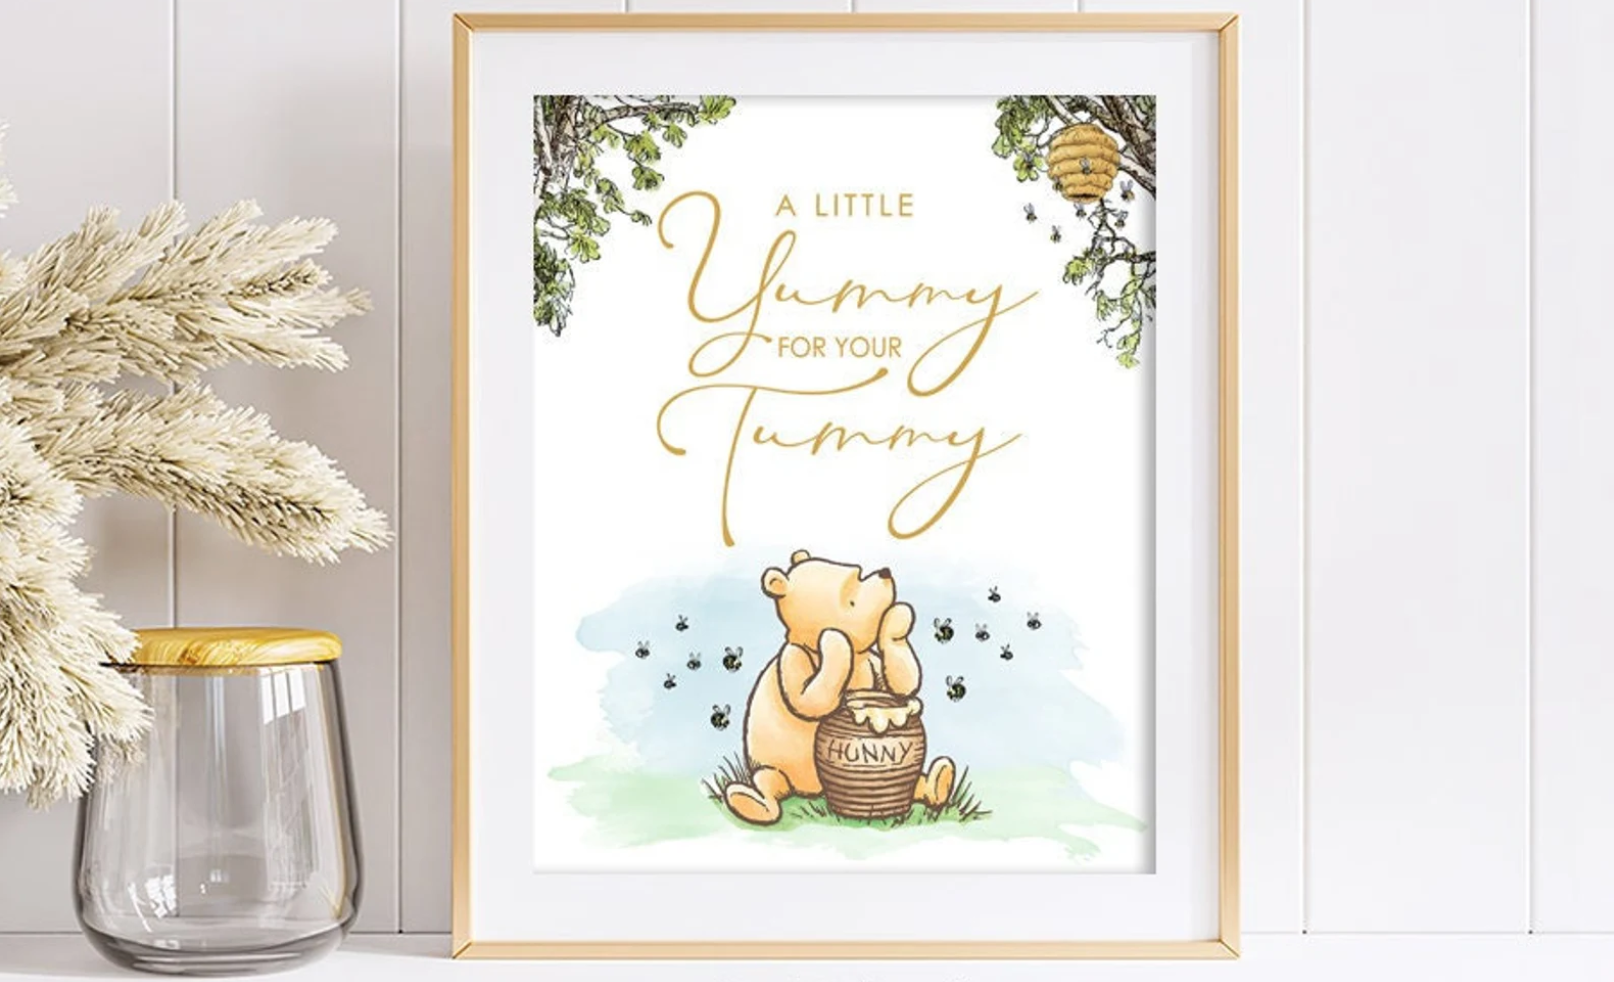 Framed Winnie the Pooh image with the text "A little Yummy for your Tummy"